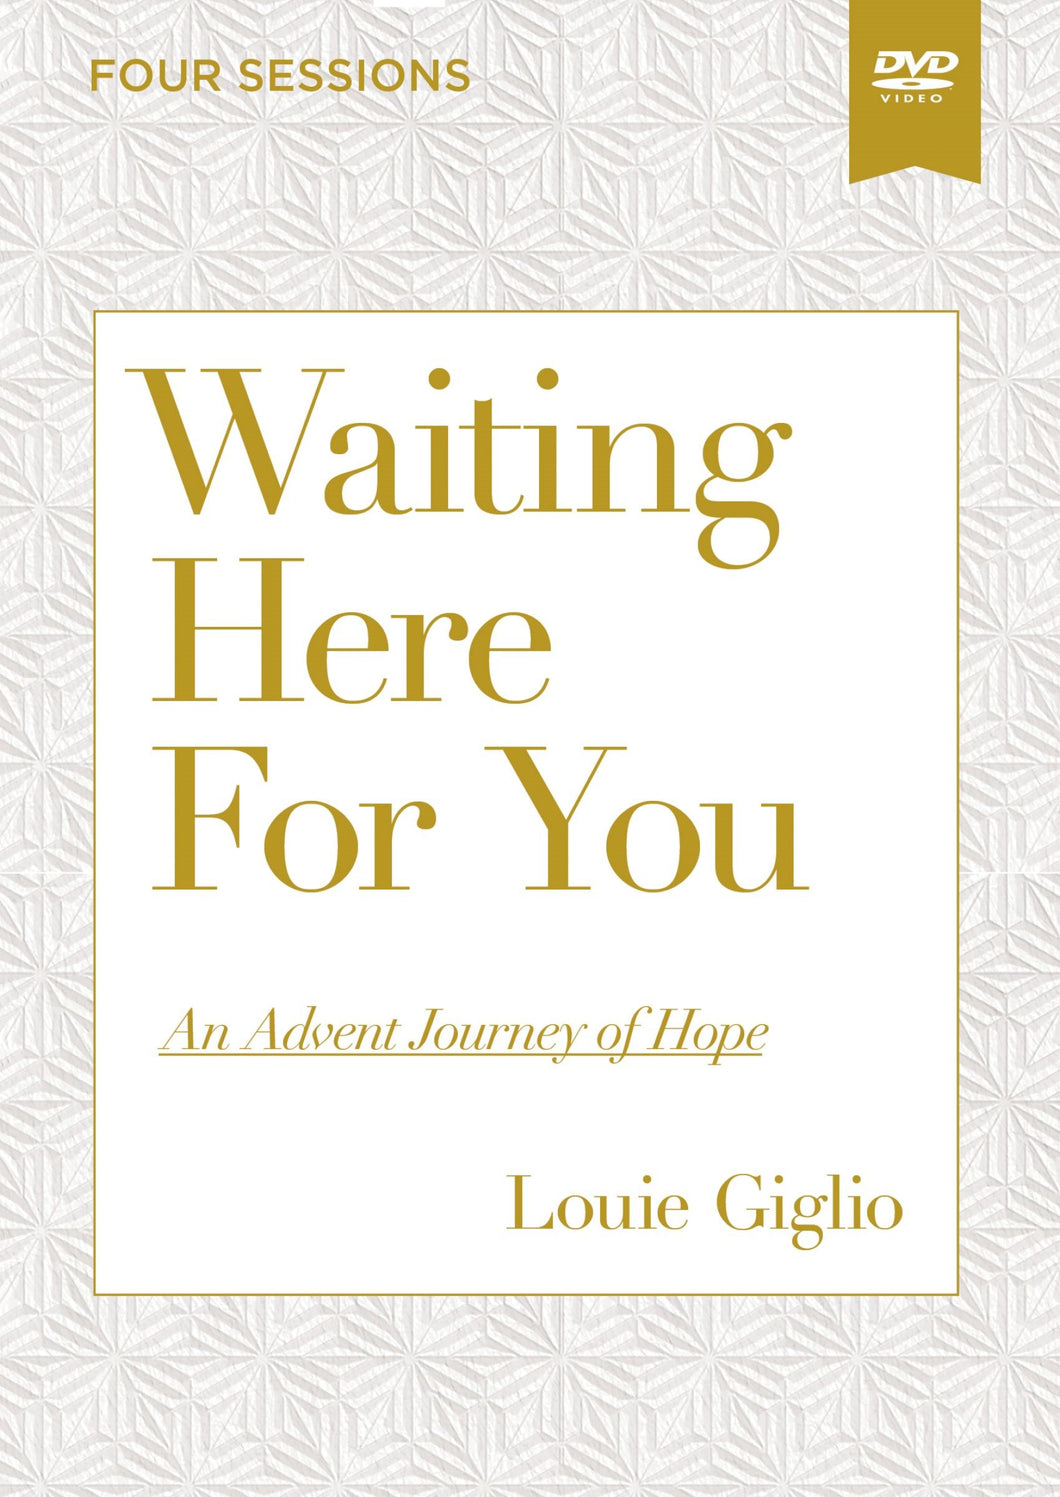 DVD-Waiting Here For You Video Study